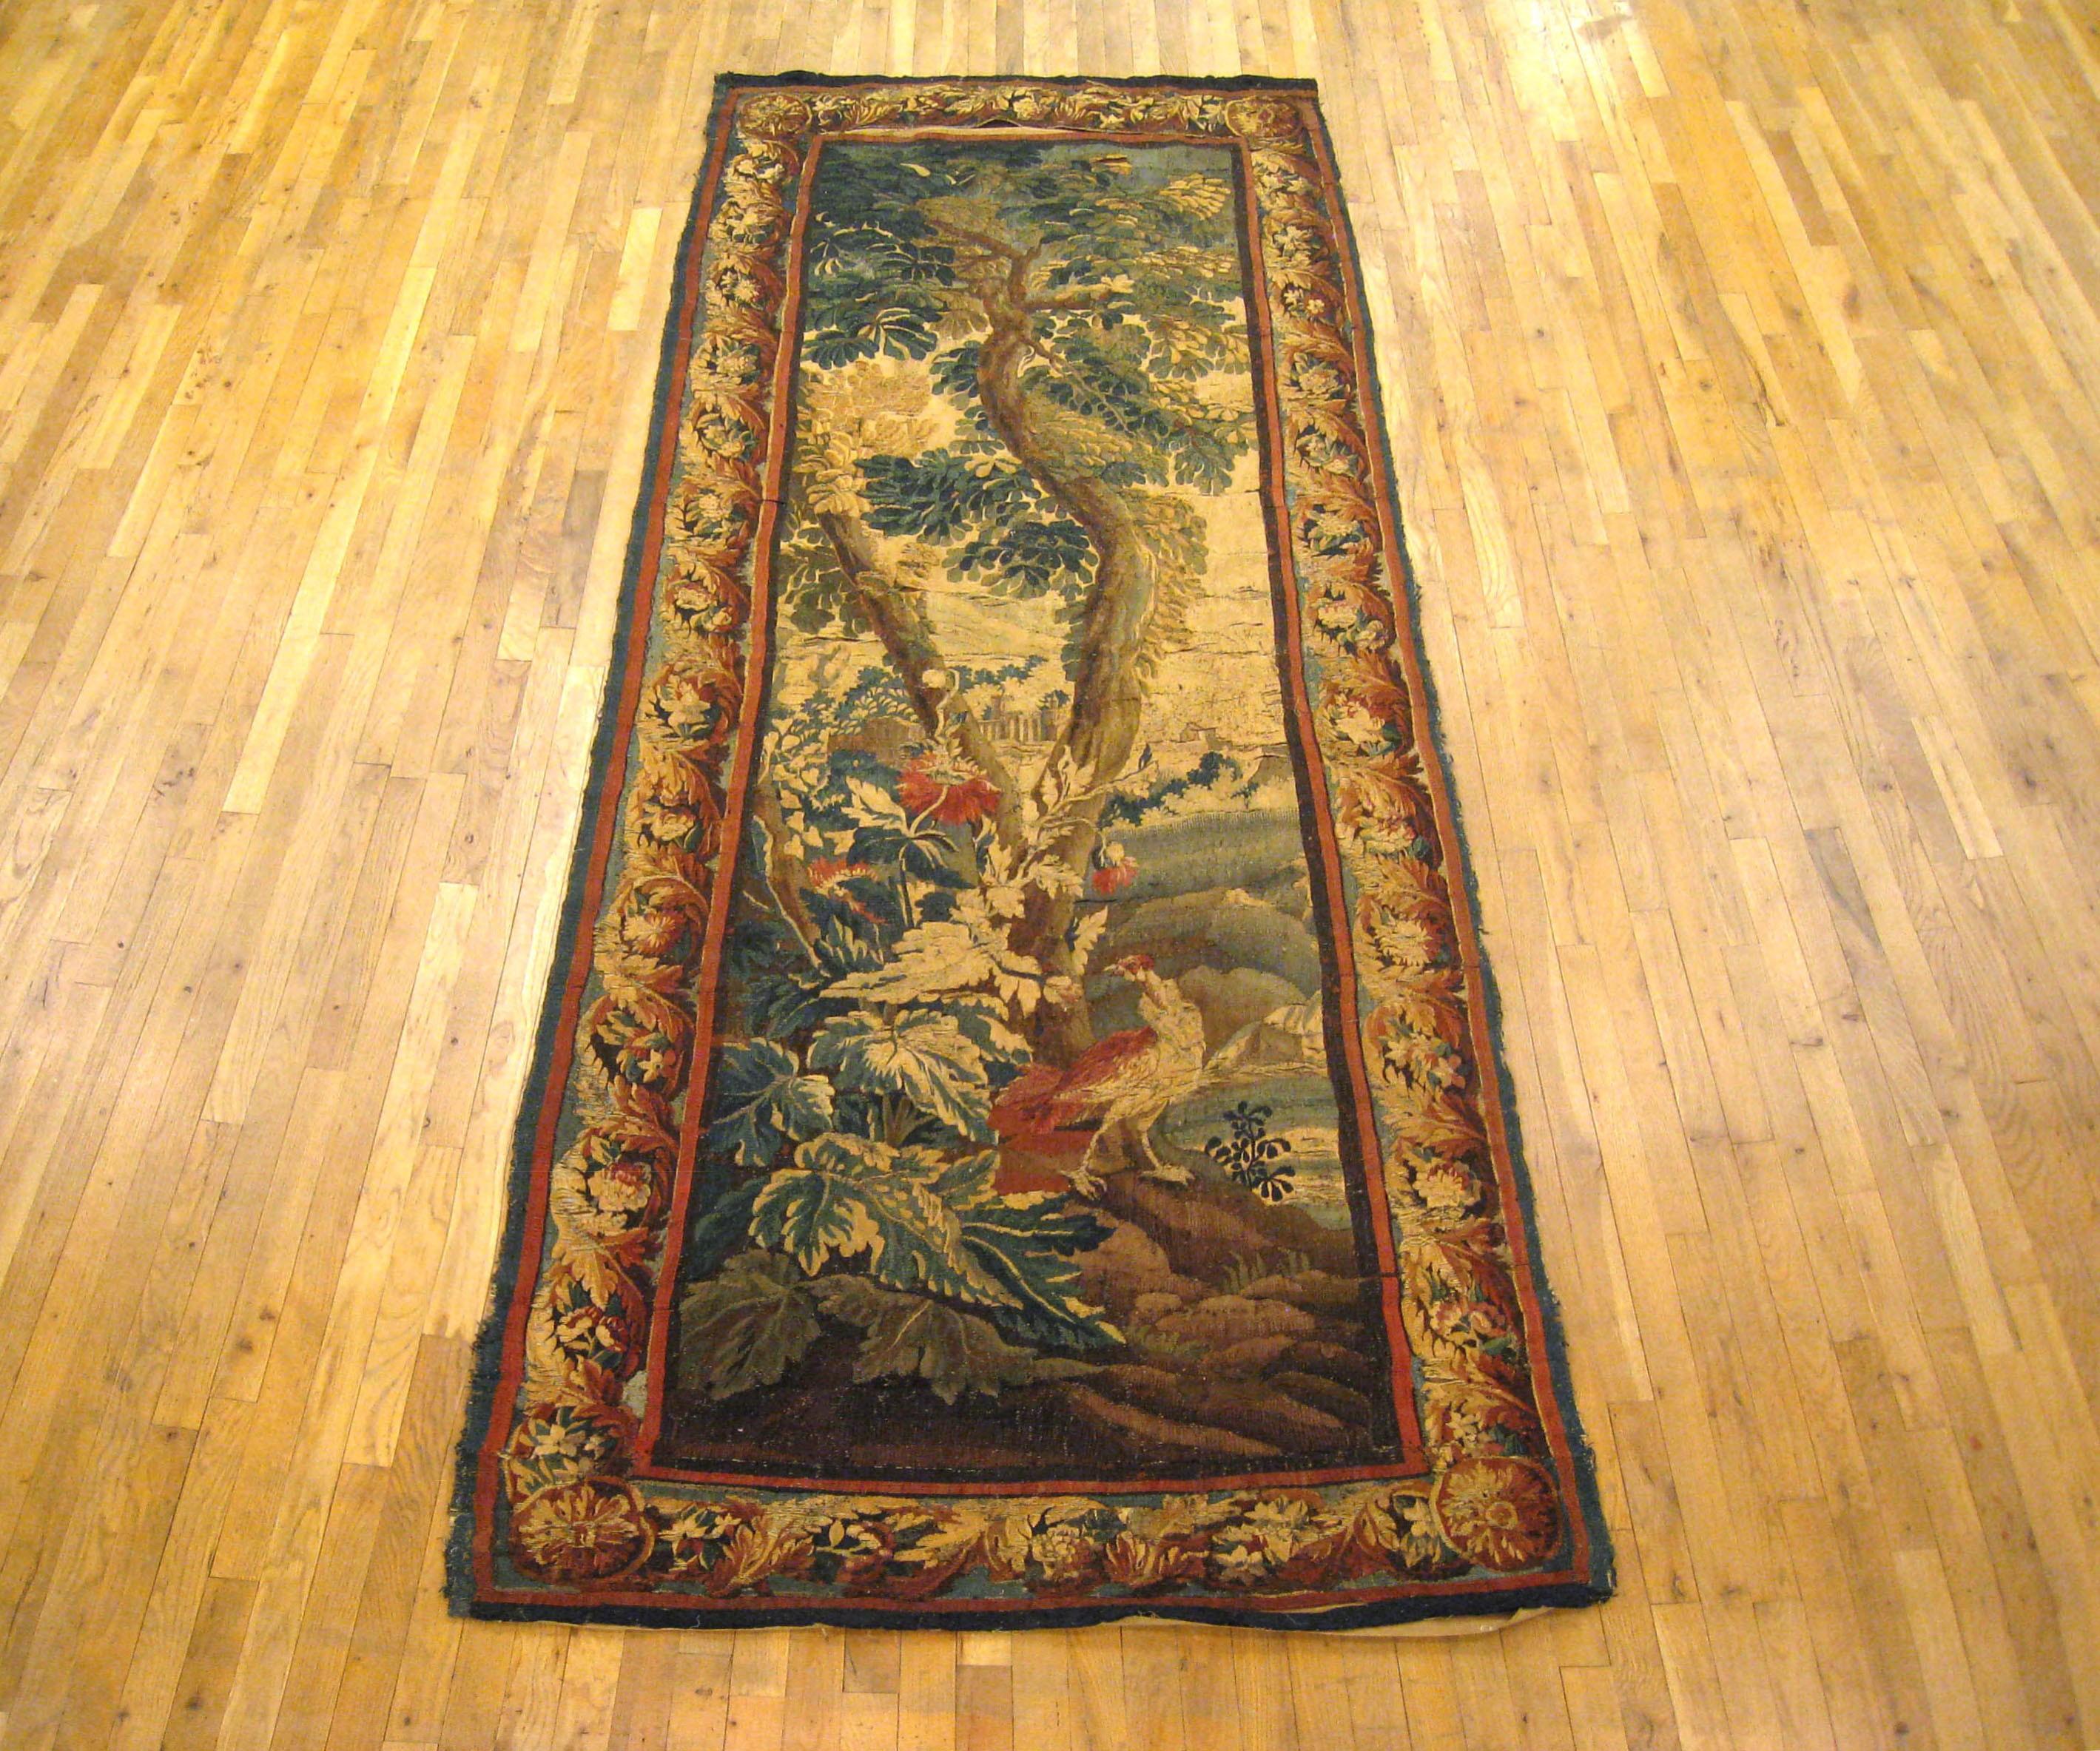 A Flemish verdure landscape tapestry panel from the 18th century. This handwoven antique wall hanging features a verdure scene with a beautiful red bird in front of a verdant tree near a lake. In the background, an elegant architectural building can